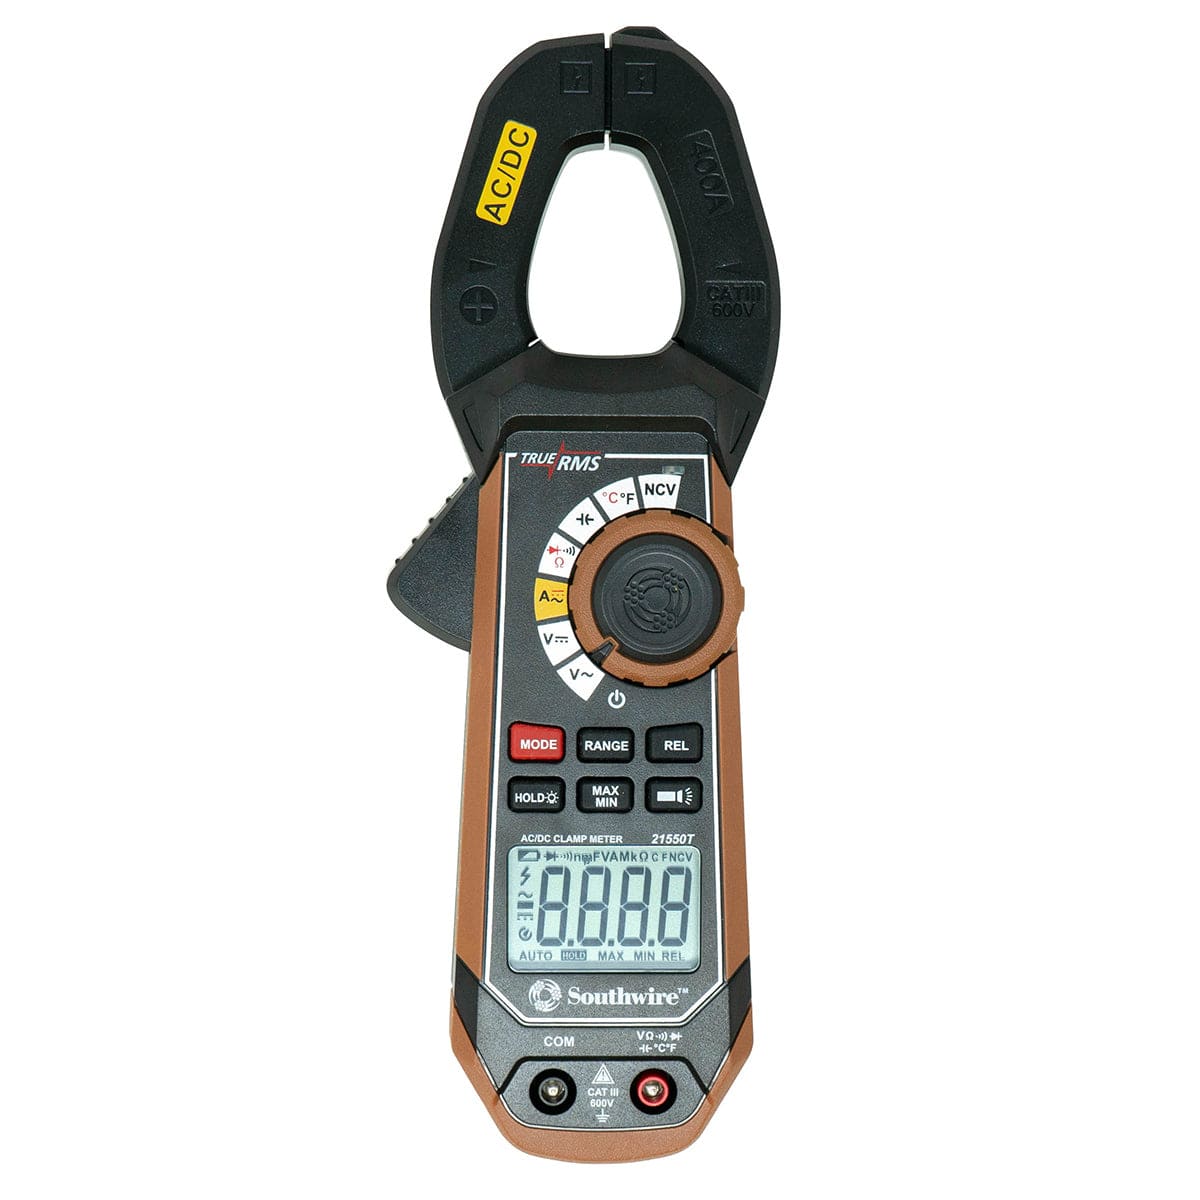 Southwire 21550T 400A AC/DC Clamp Meter with True RMS, Built-In NCV, Worklight, and Third-Hand Test Probe Holder